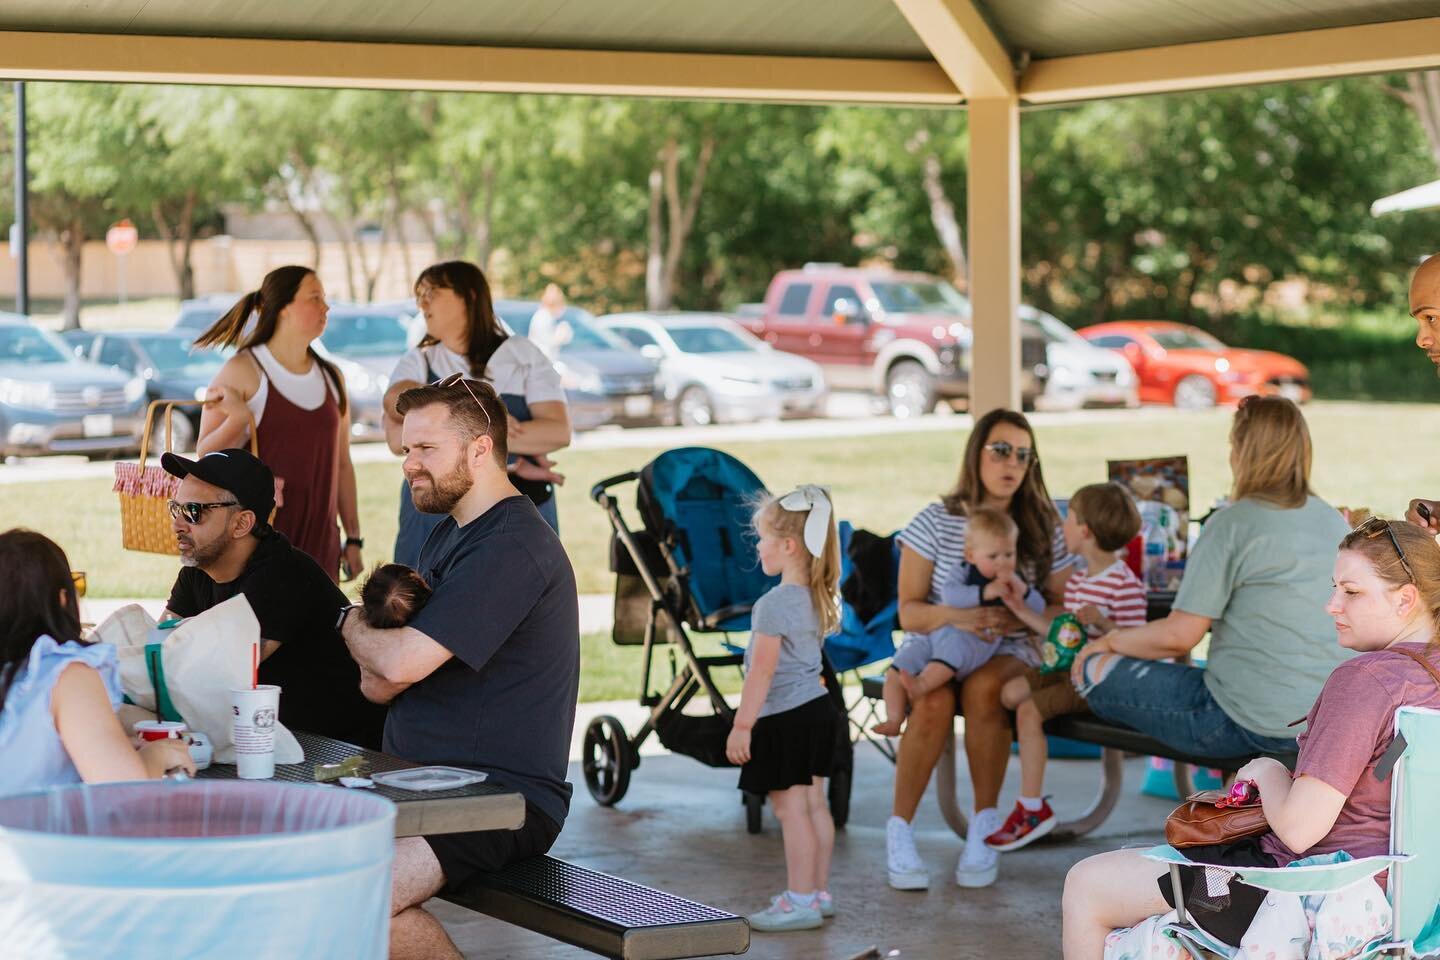 We had a great time at our All Church Picnic last week. Tomorrow morning we jump into our new series in Jonah! Also, our Ladies Dessert Social is tomorrow evening. Invite a friend, bring a favorite dessert, and enjoy getting to know some new faces ar